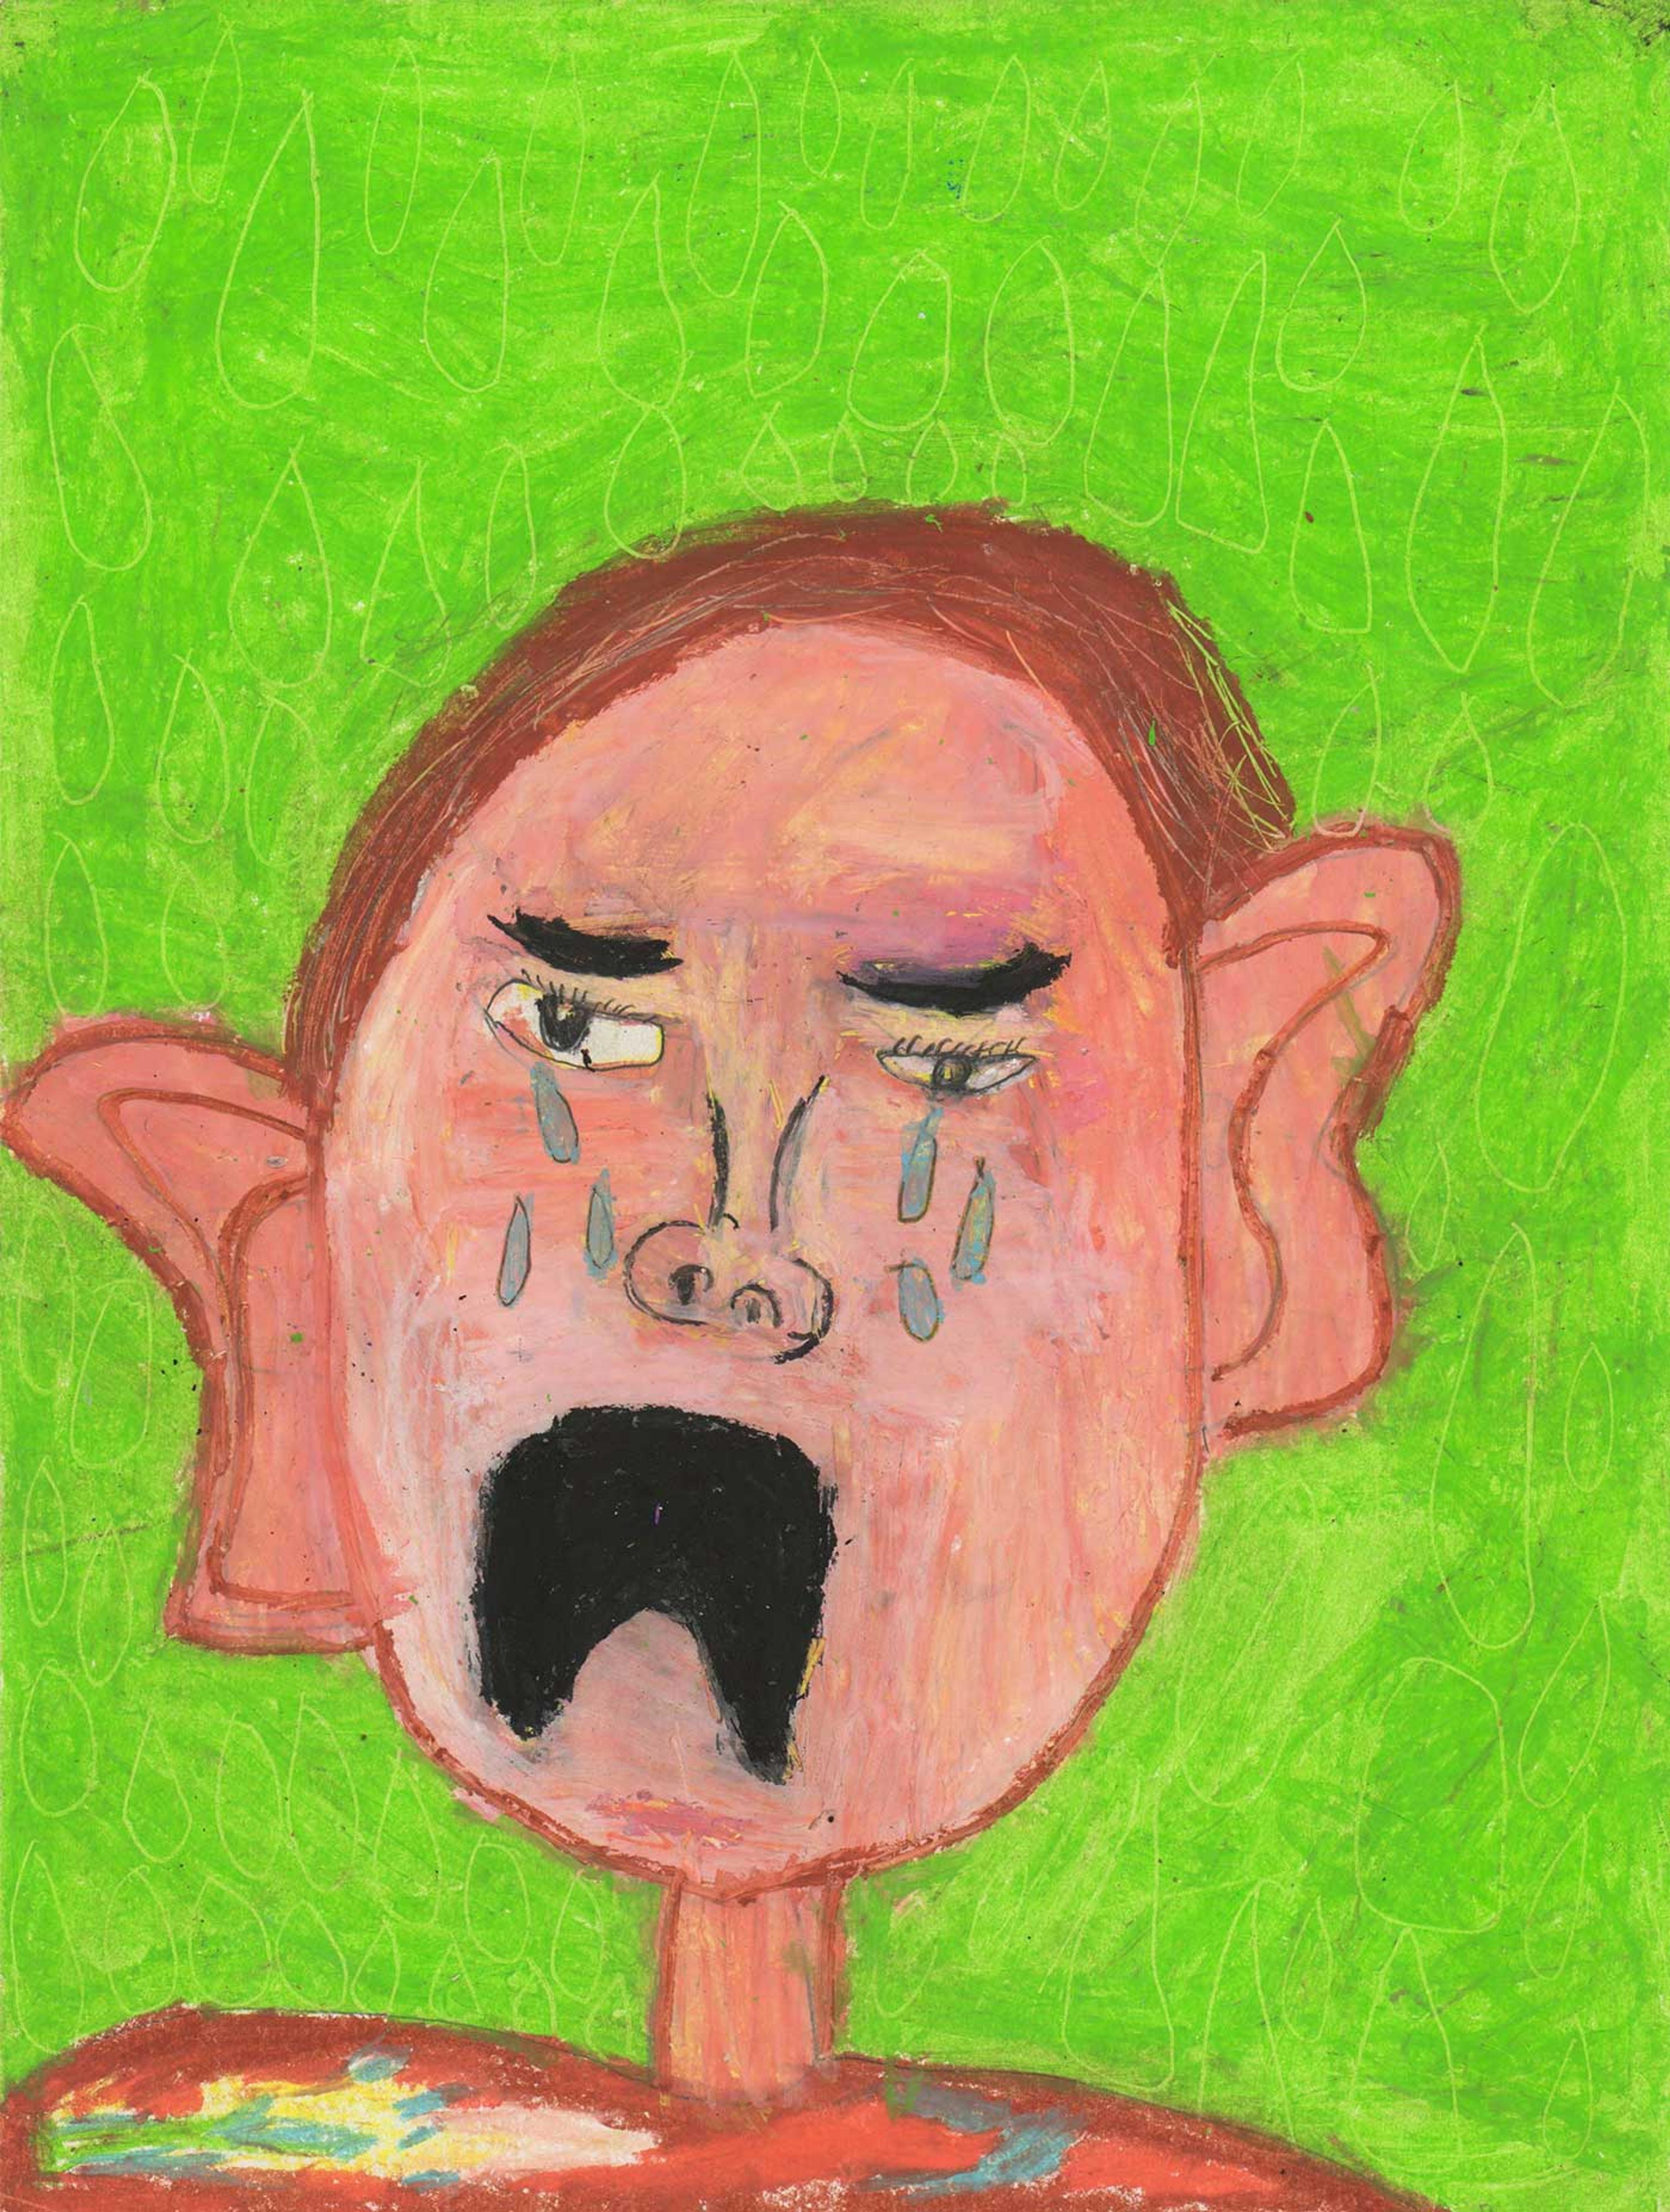 Portrait of a young boy crying on a green background.